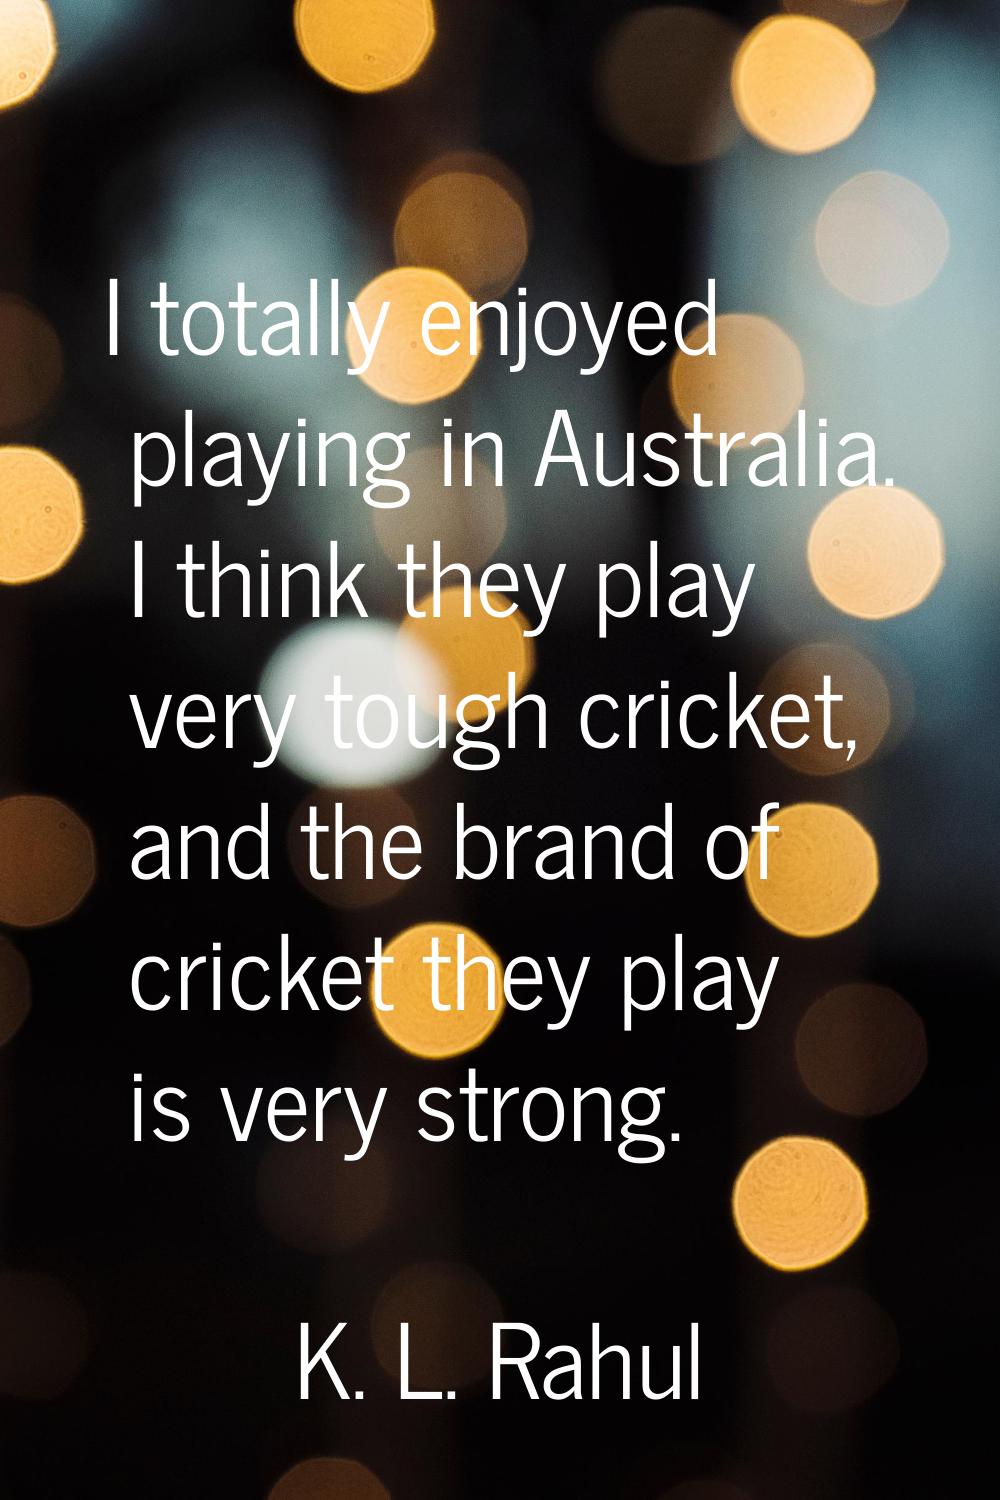 I totally enjoyed playing in Australia. I think they play very tough cricket, and the brand of cric